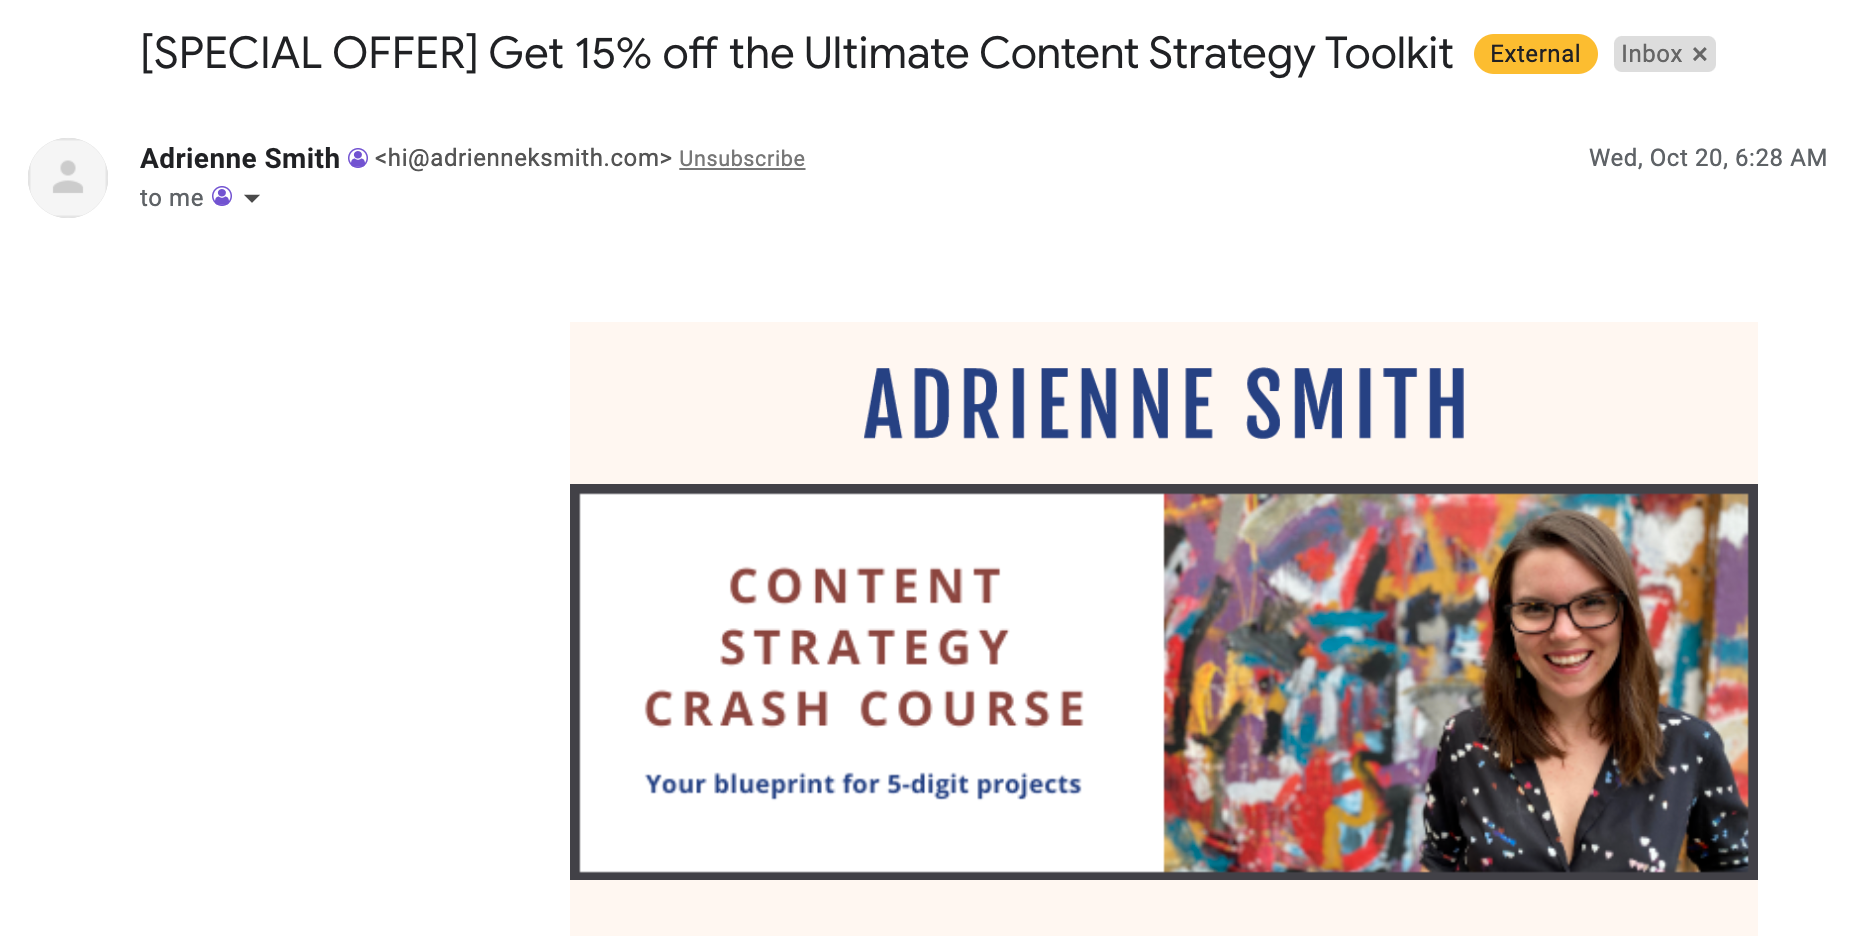 Example of monetizing email lists by email courses